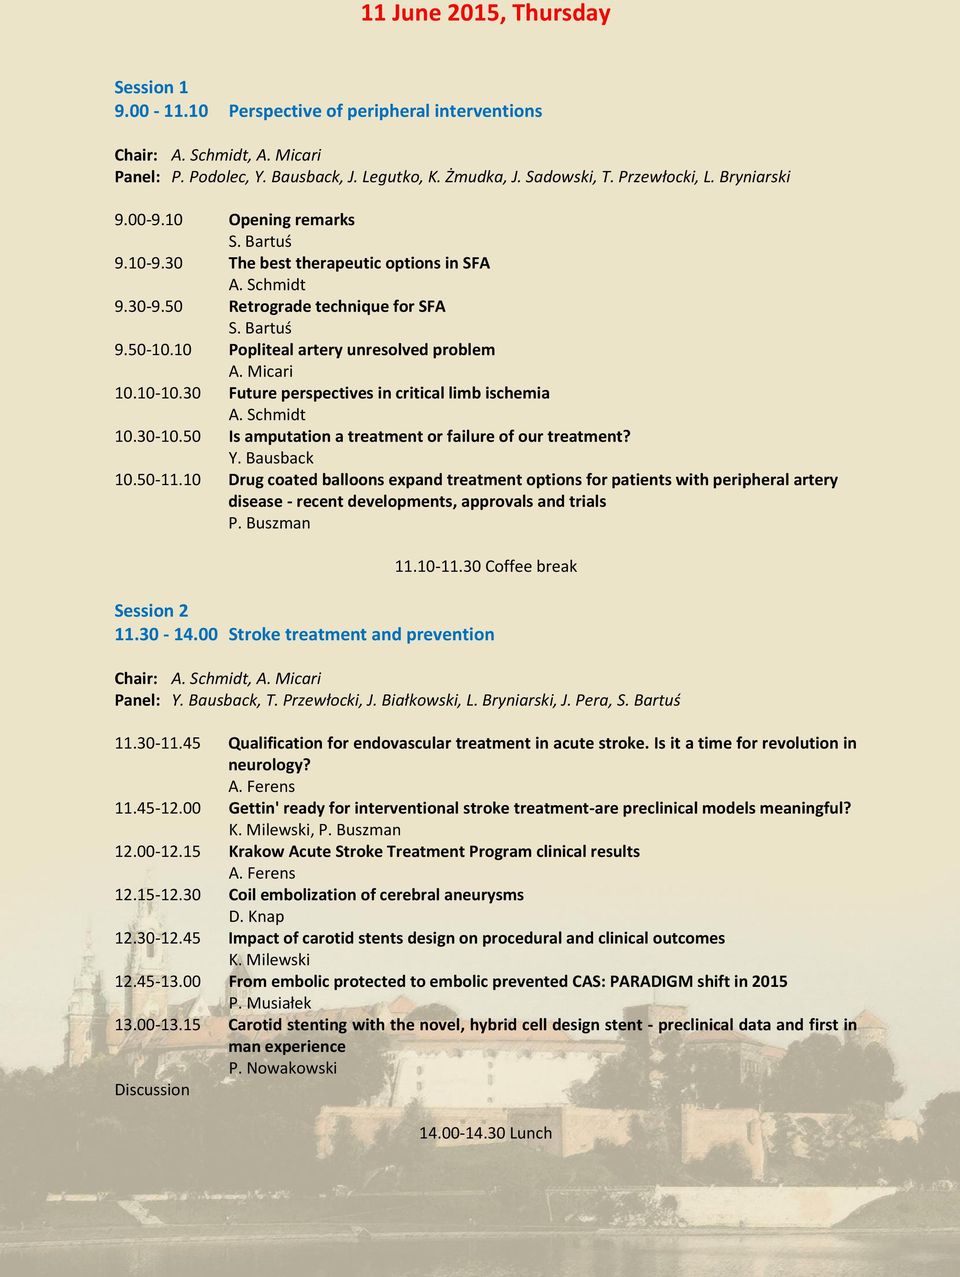 10 Popliteal artery unresolved problem A. Micari 10.10-10.30 Future perspectives in critical limb ischemia A. Schmidt 10.30-10.50 Is amputation a treatment or failure of our treatment? Y. Bausback 10.